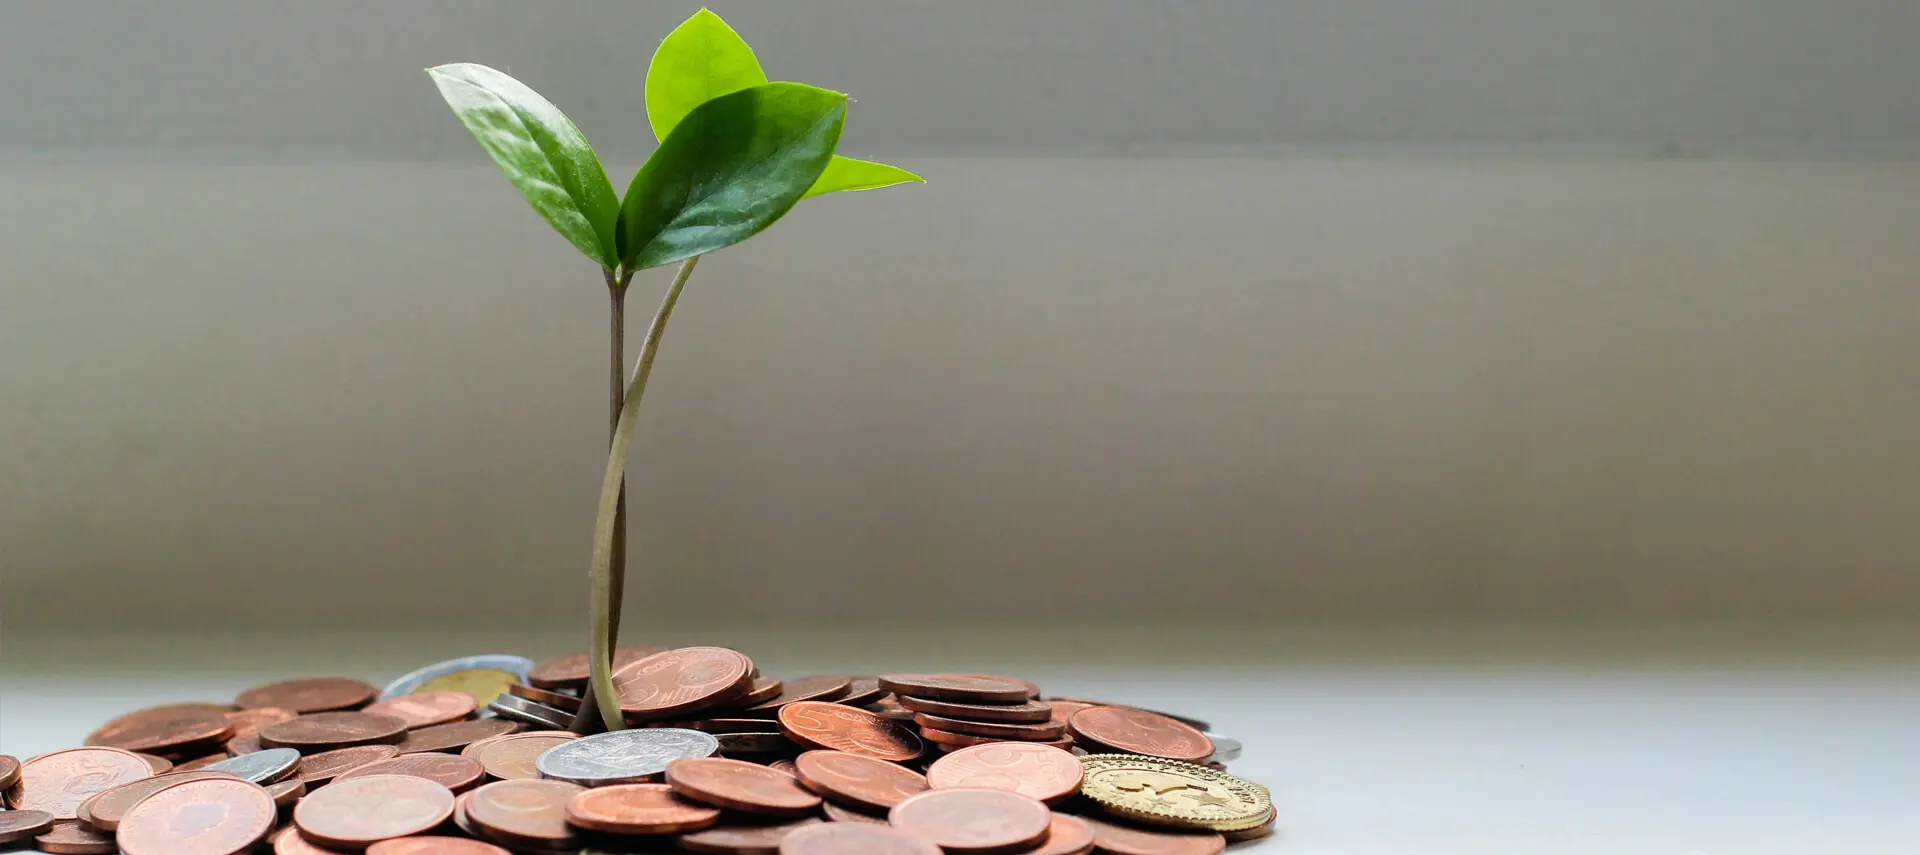 A plant growing from some coins on top of a table.